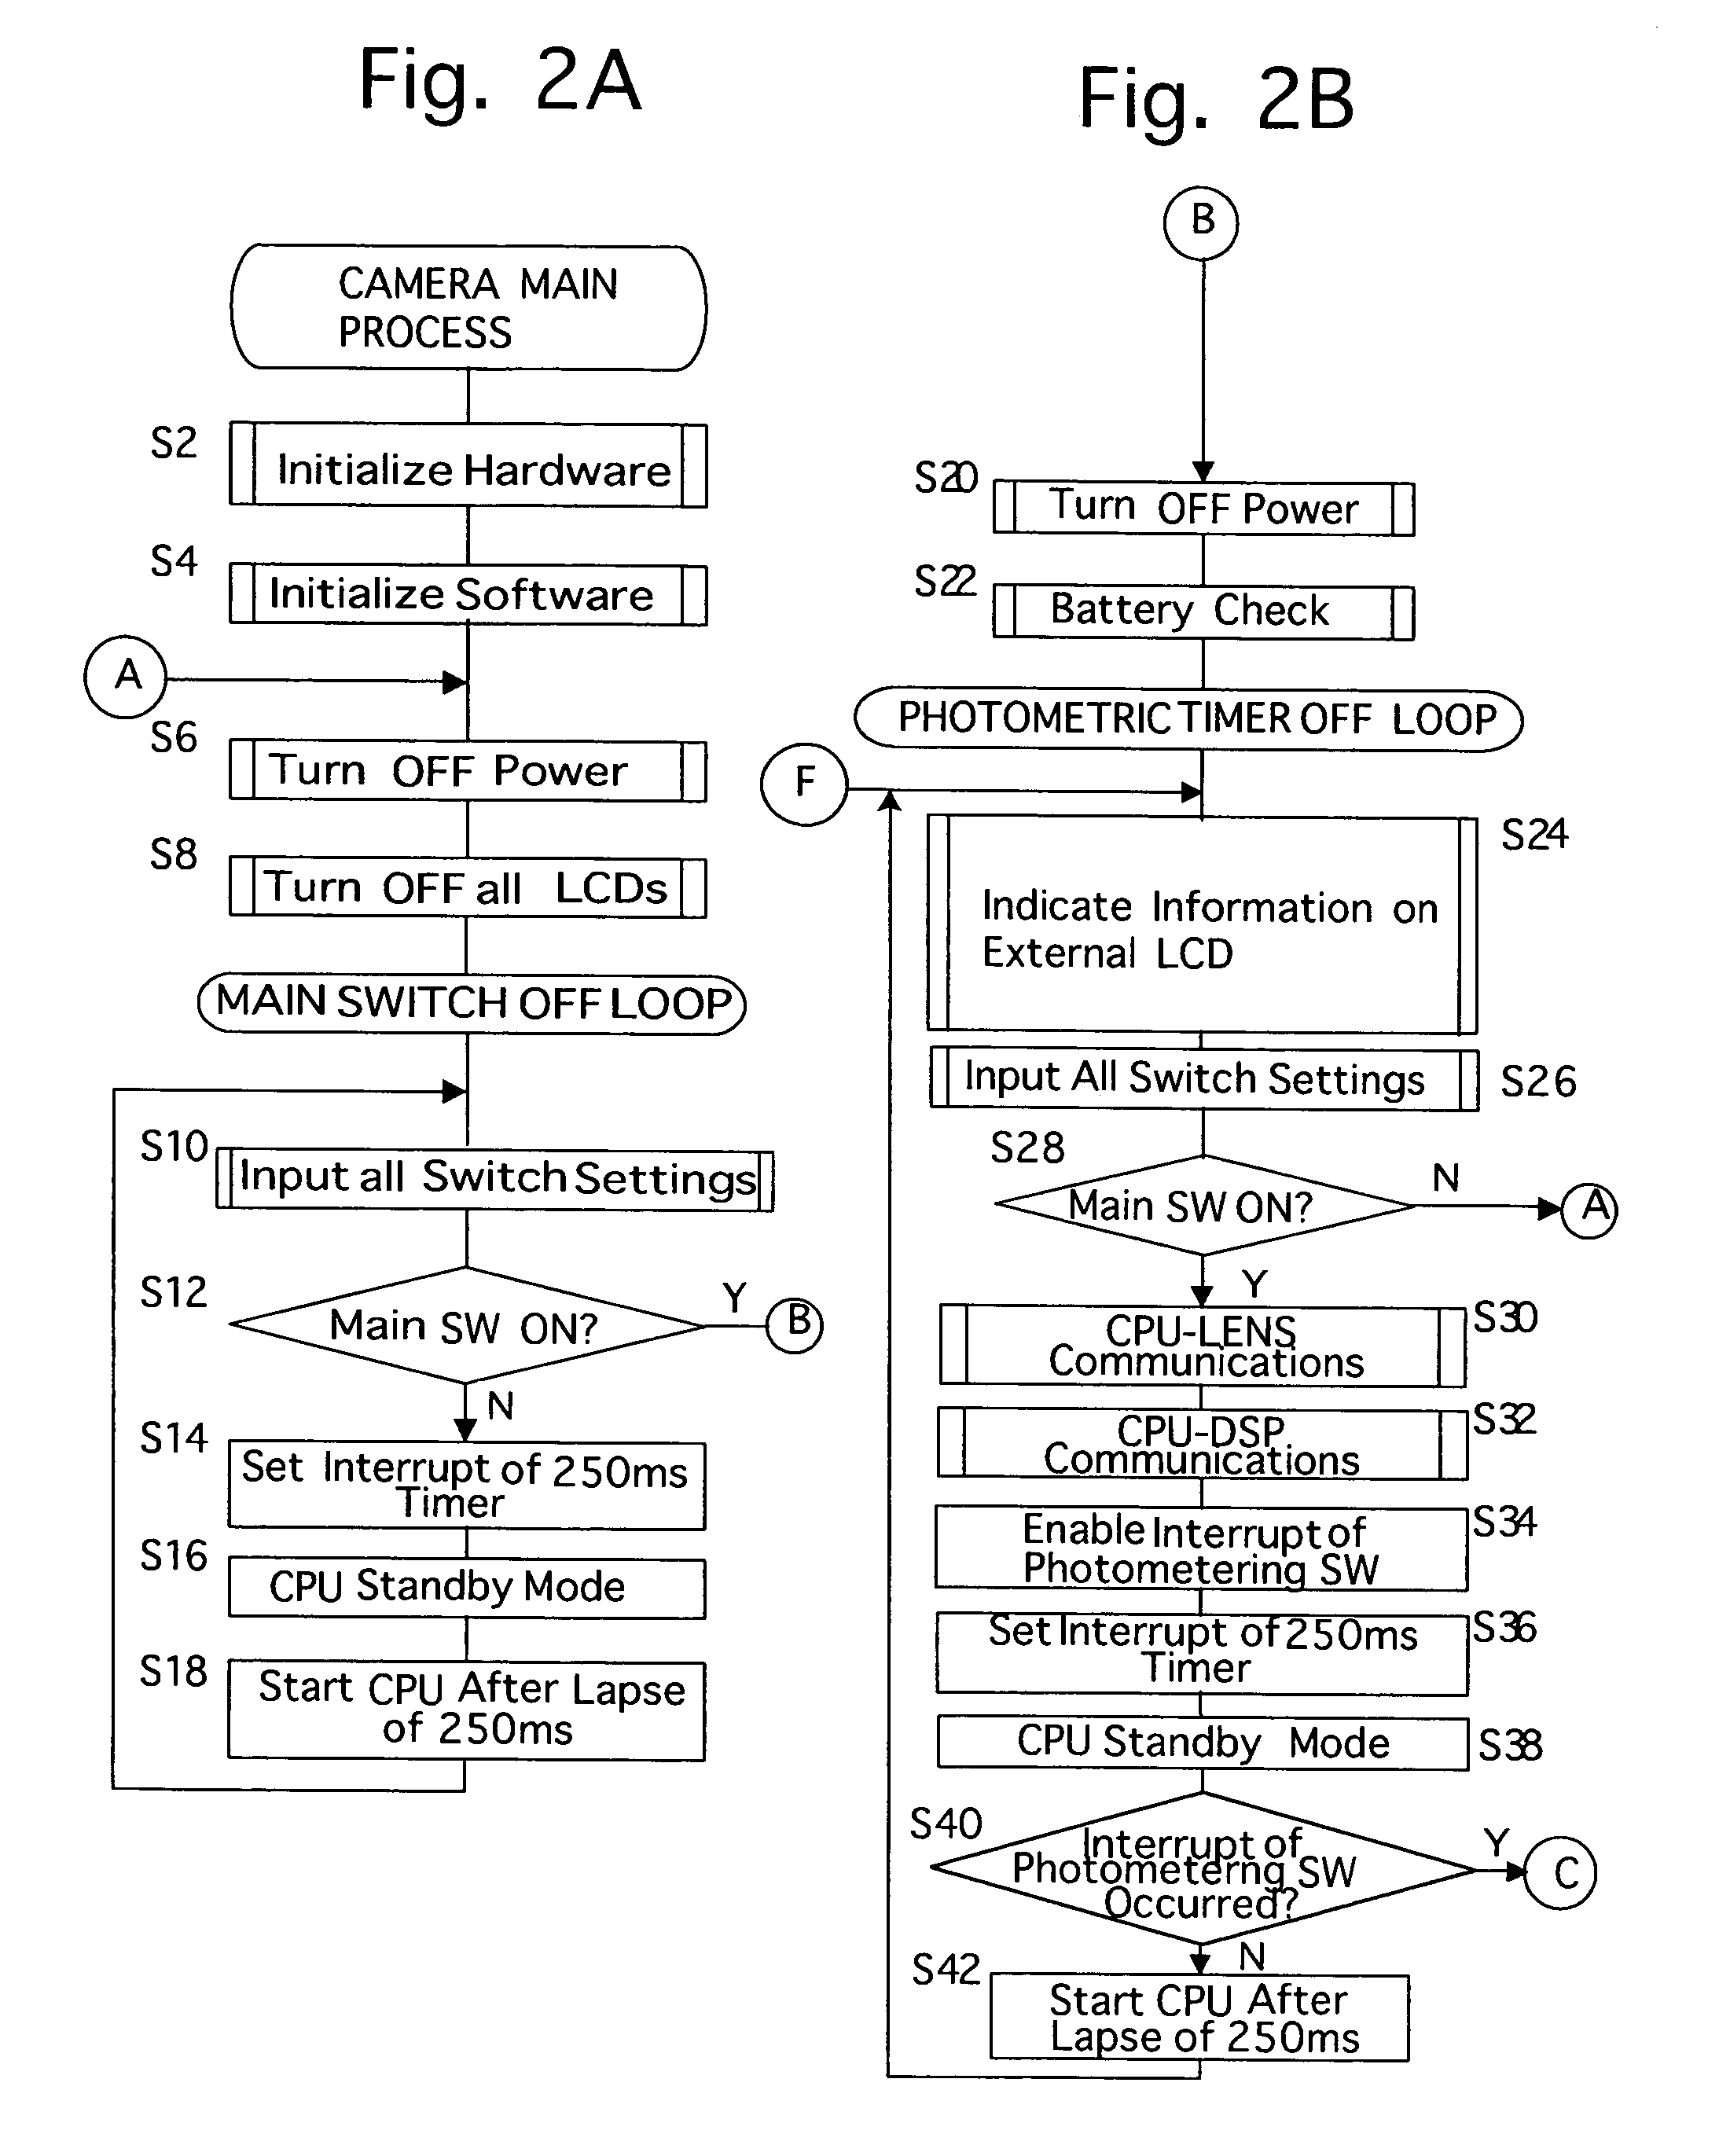 Digital camera with a battery checking device